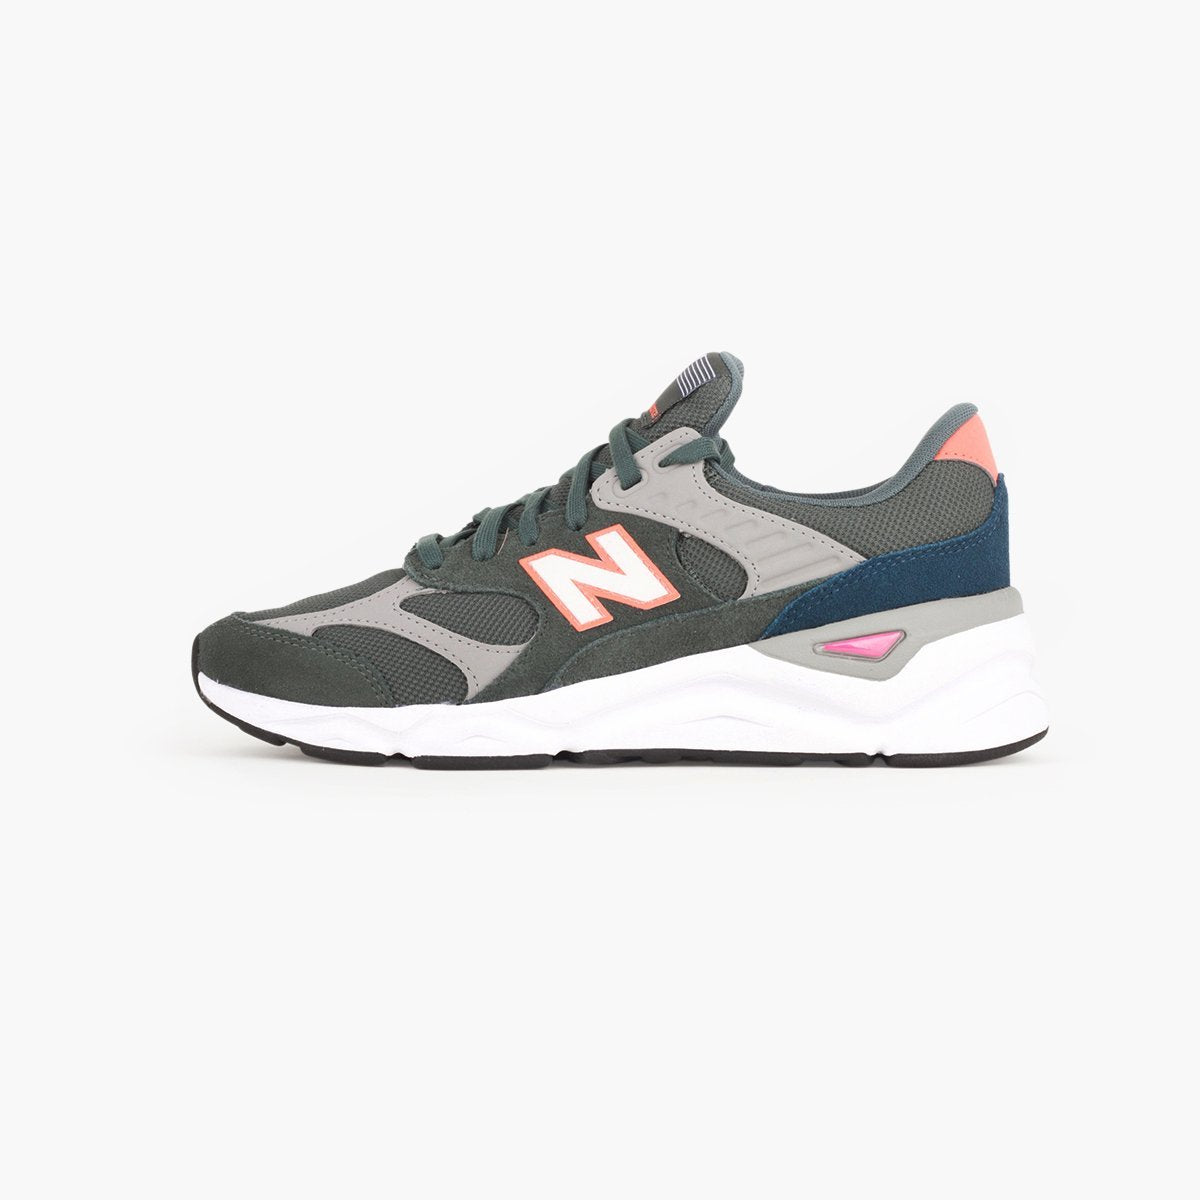 New Balance MSX90RCG-SUEDE Store